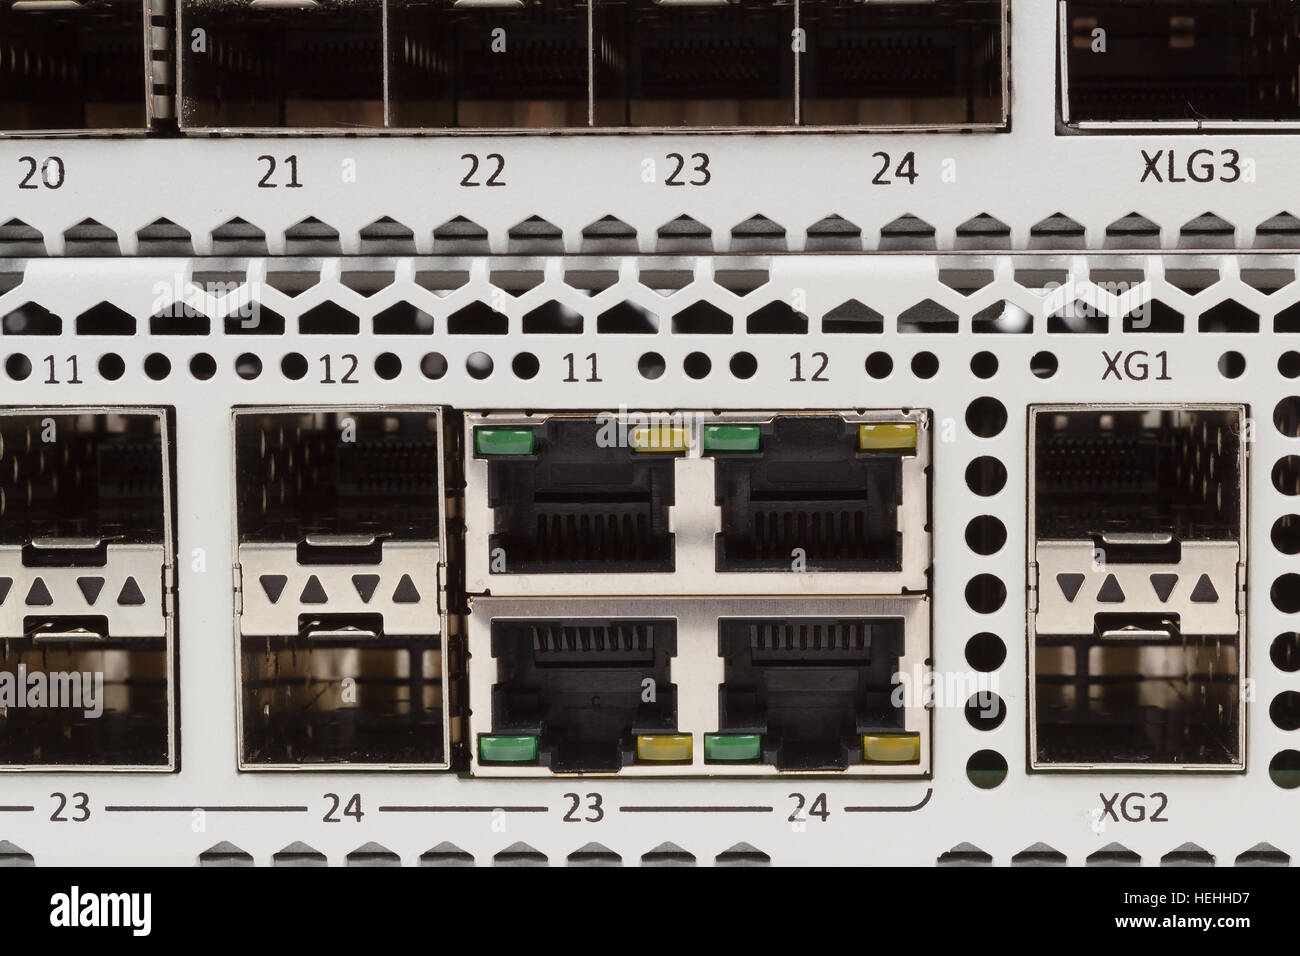 detail of fiber optic gigabit ethernet switch with SFP module slot and UTP category 5 connectors RJ-45 Stock Photo